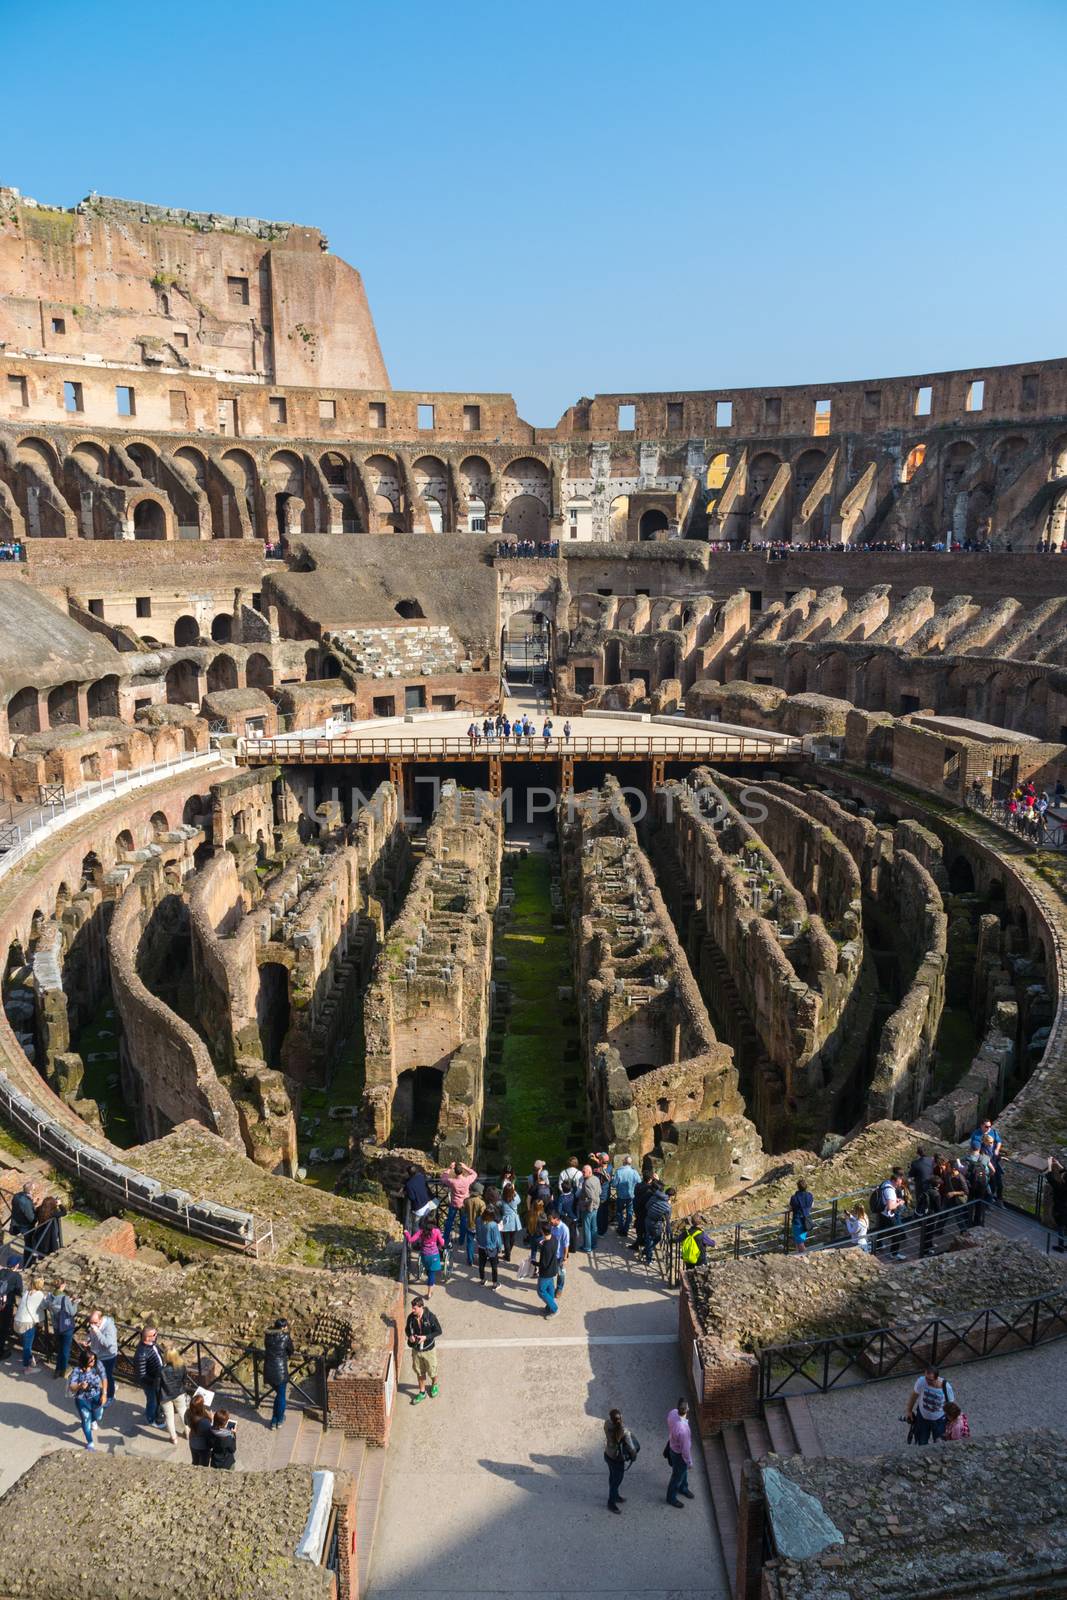 View of the Colosseum ruins in Rome, inside the arena